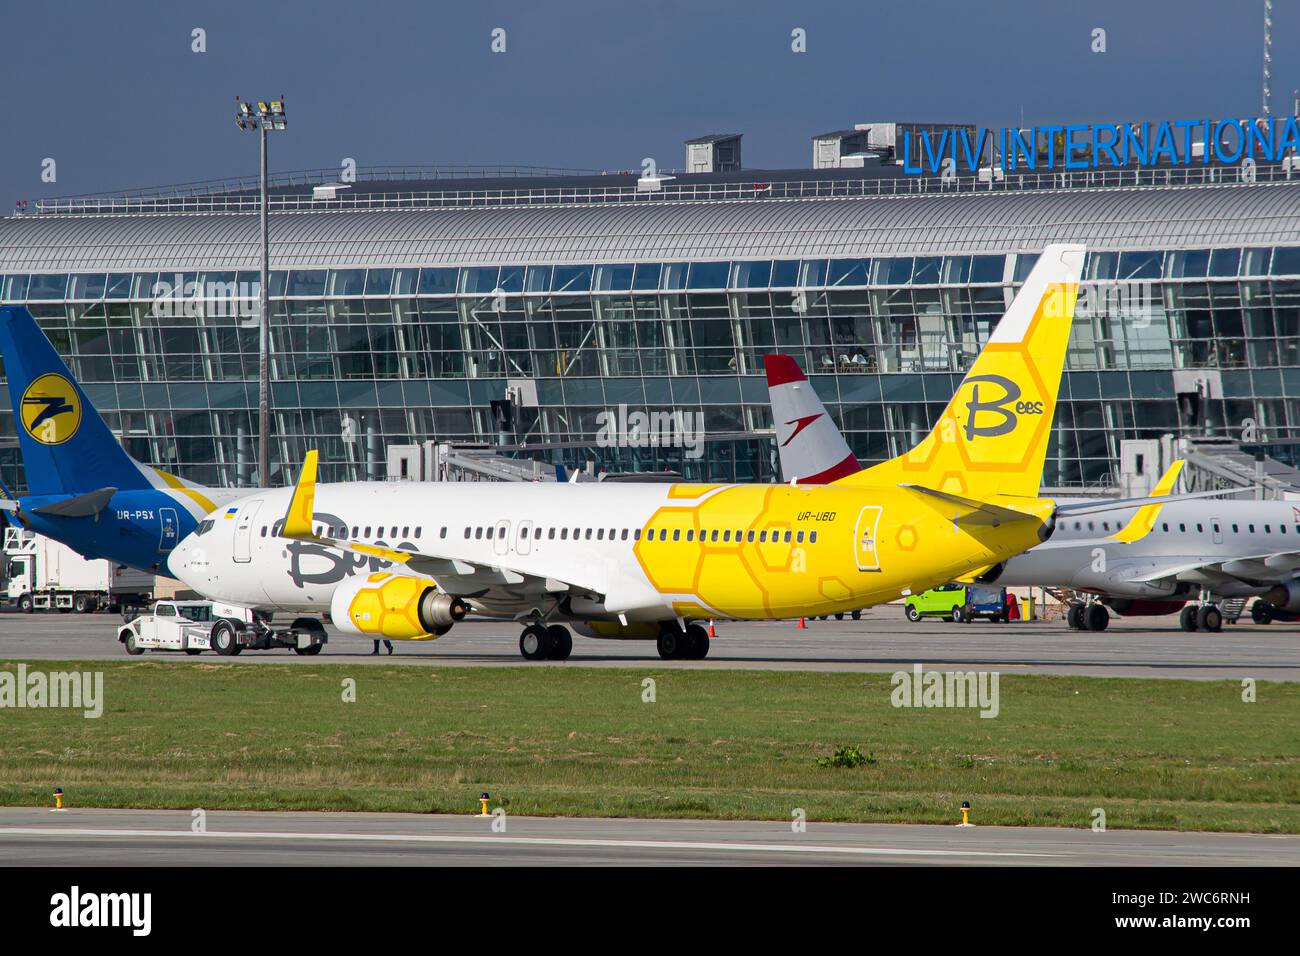 Ukrainian airline's Bees Airline Boeing 737-800 being pushed back for taxiing at Lviv Airport Stock Photo